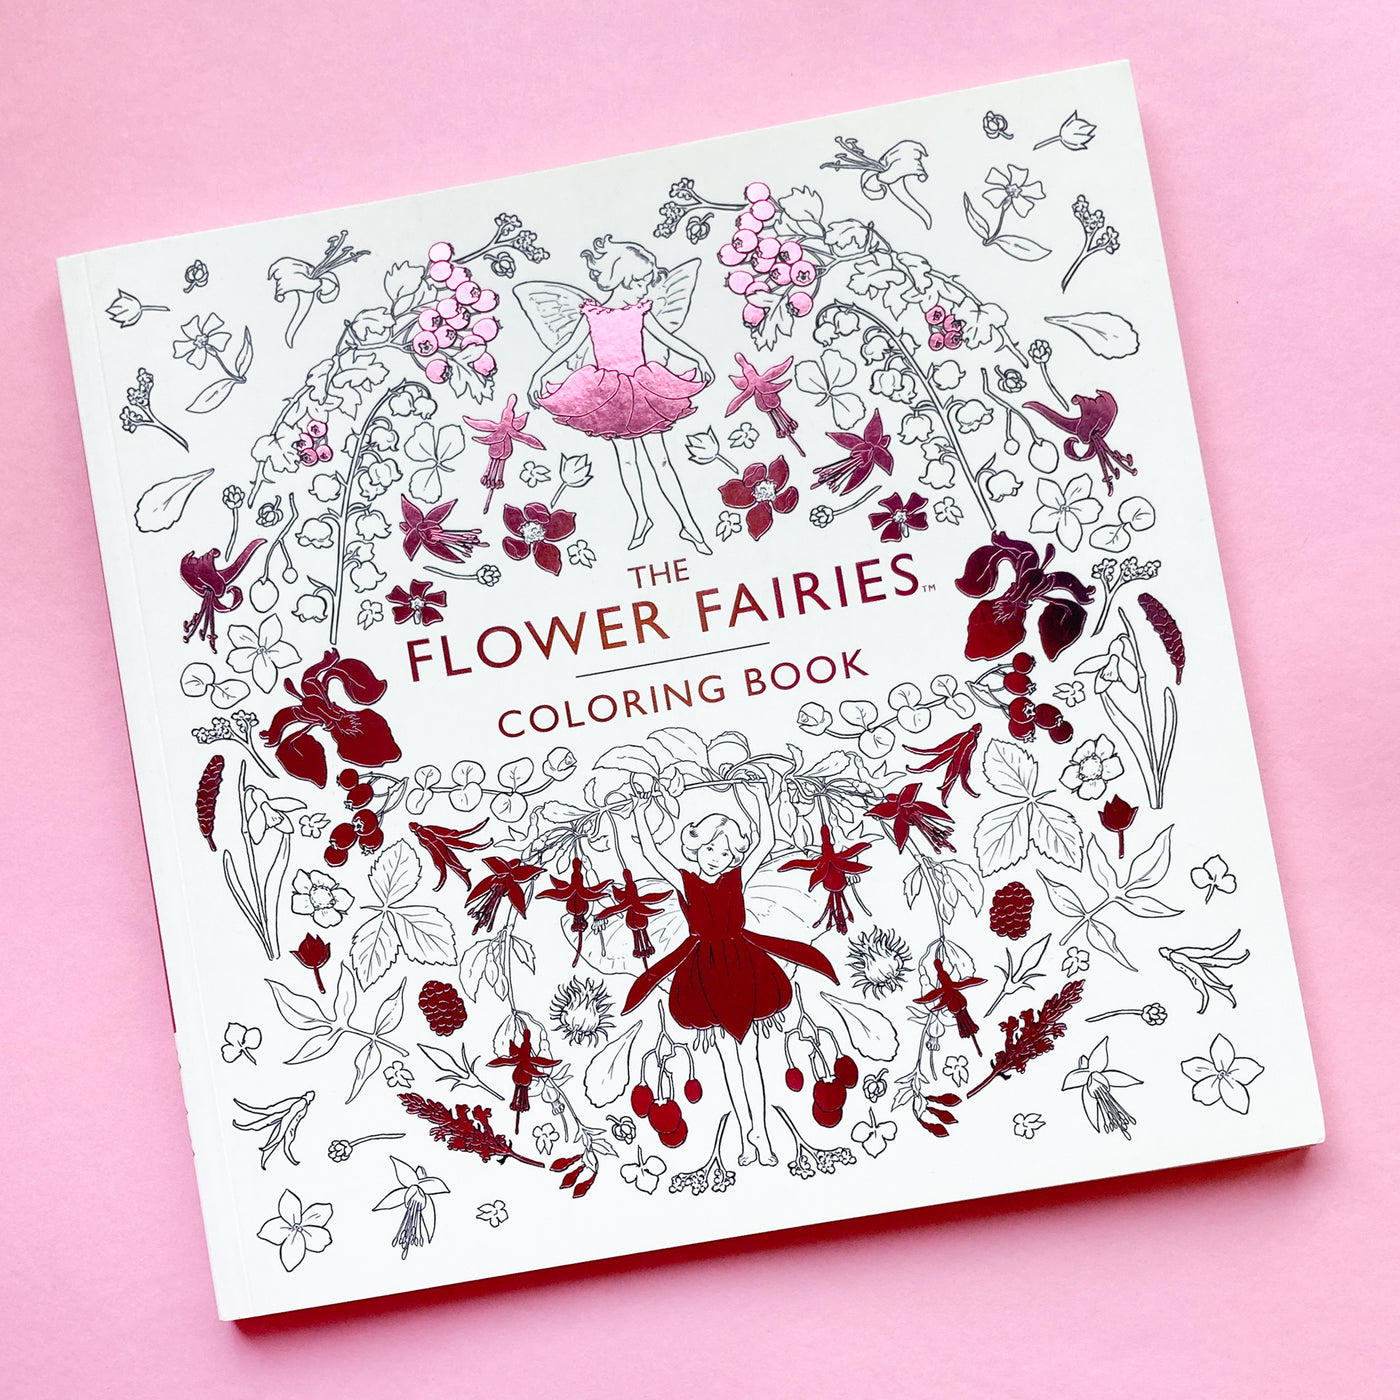 The Flower Fairies Coloring Book by Cicely Mary Barker